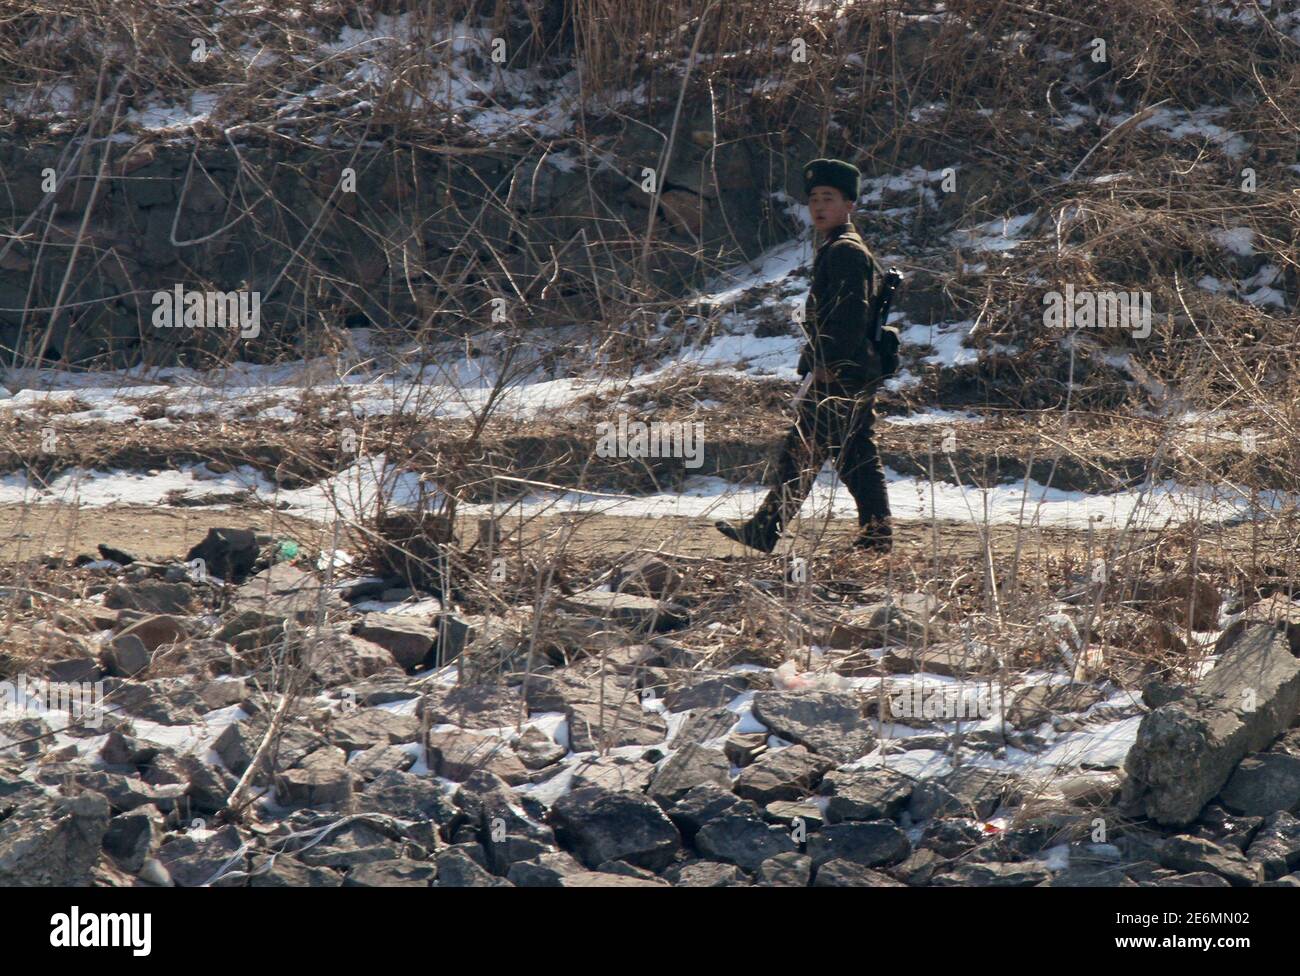 A soldier patrols on the banks of the Yalu River, near the North Korean town of Sinuiju, opposite the Chinese border city of Dandong, February 26, 2016. Picture taken from China's side of the Yalu. REUTERS/Jacky Chen Stock Photo